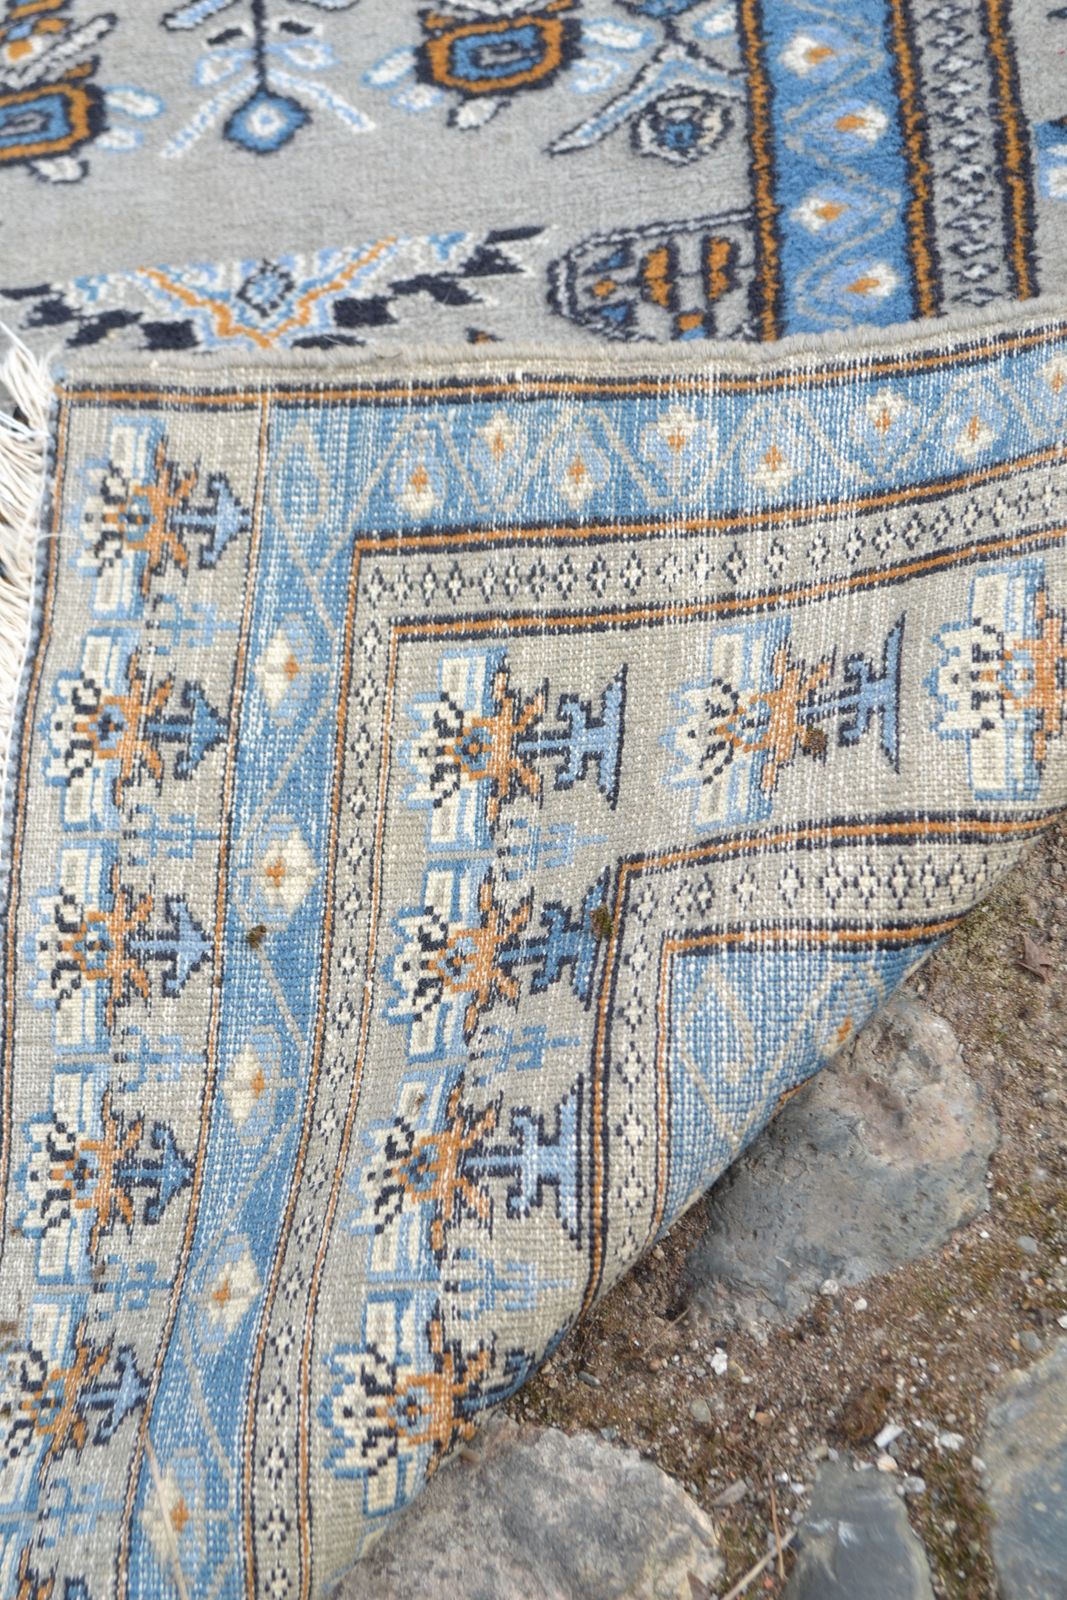 Antique Persian Rug With A Sky Blue Ground